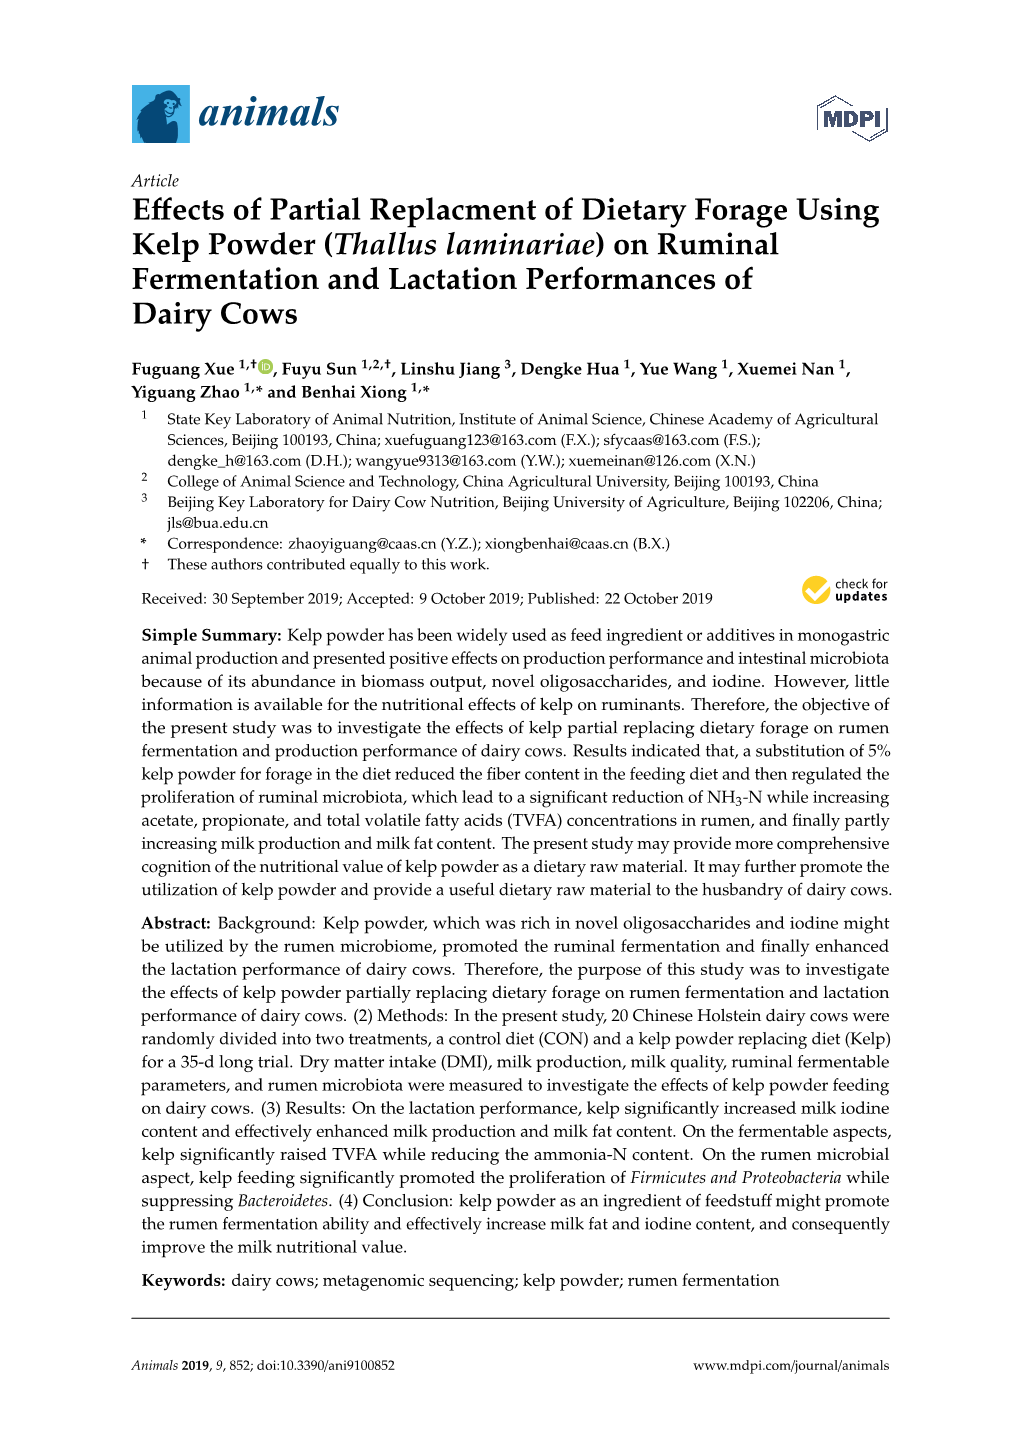 Effects of Partial Replacment of Dietary Forage Using Kelp Powder